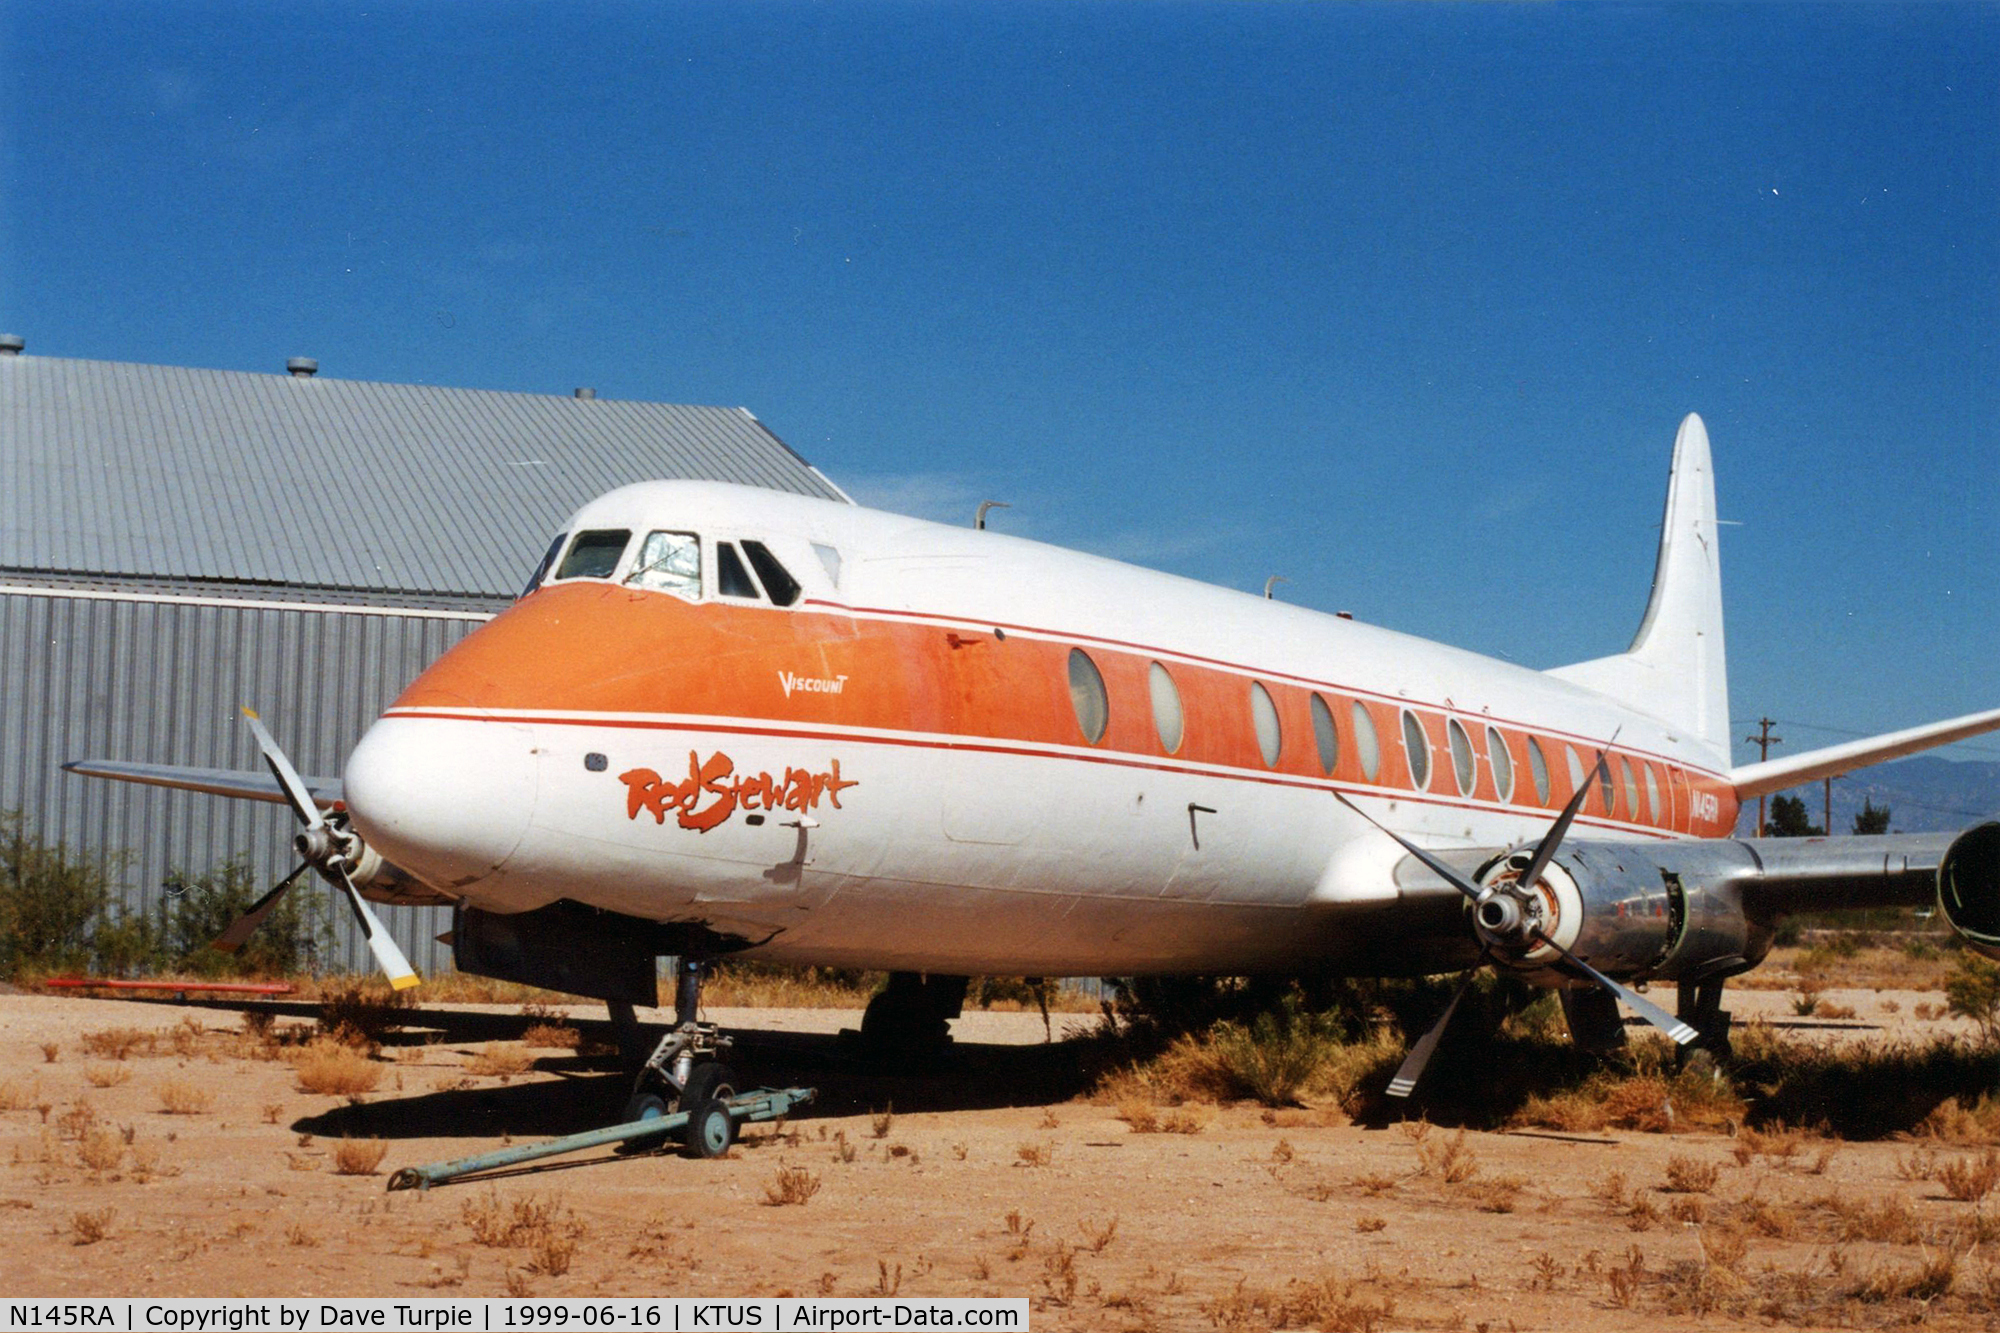 N145RA, 1959 Vickers Viscount 814 C/N 341, Rod Stewart's ride for a while.  Operated by Go Air.  The was one of many Viscounts parked at KTUS in the late 1990s. Originally registered as D-ANIP. Reported broken up in 2002.